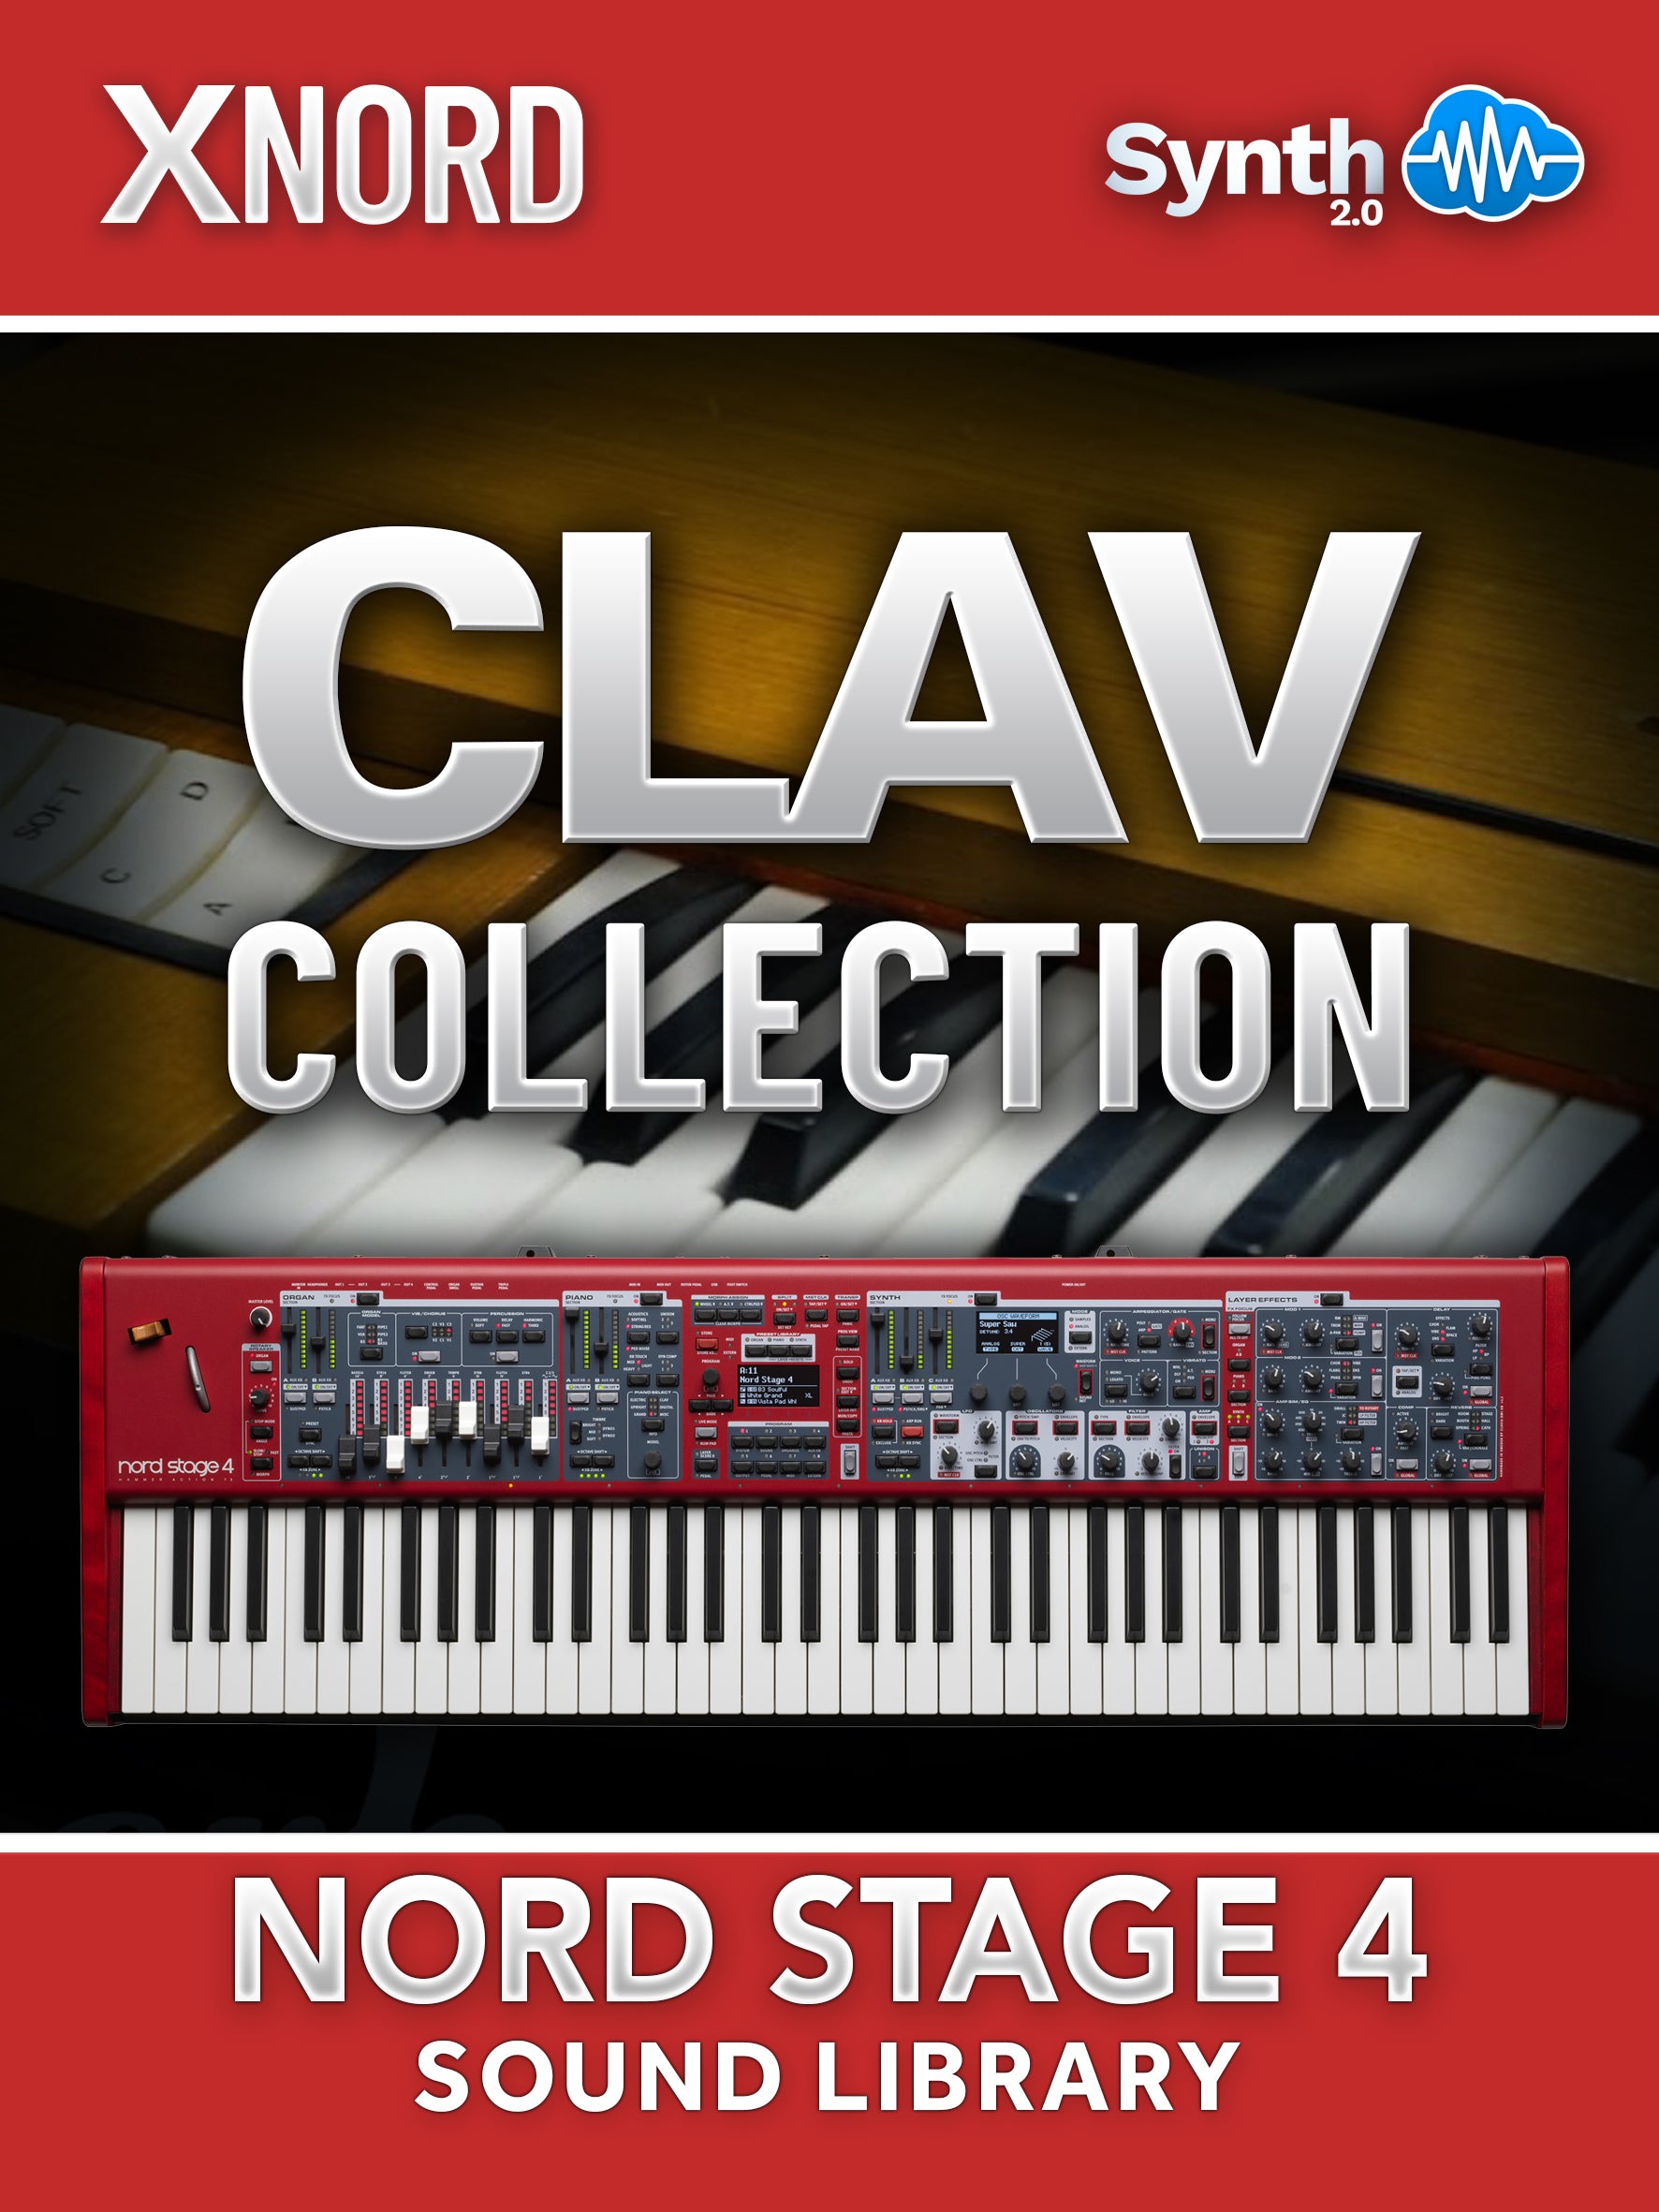 ASL014 - ( Bundle ) - Synth - Brass Collection + Clav Collection - Nord Stage 4